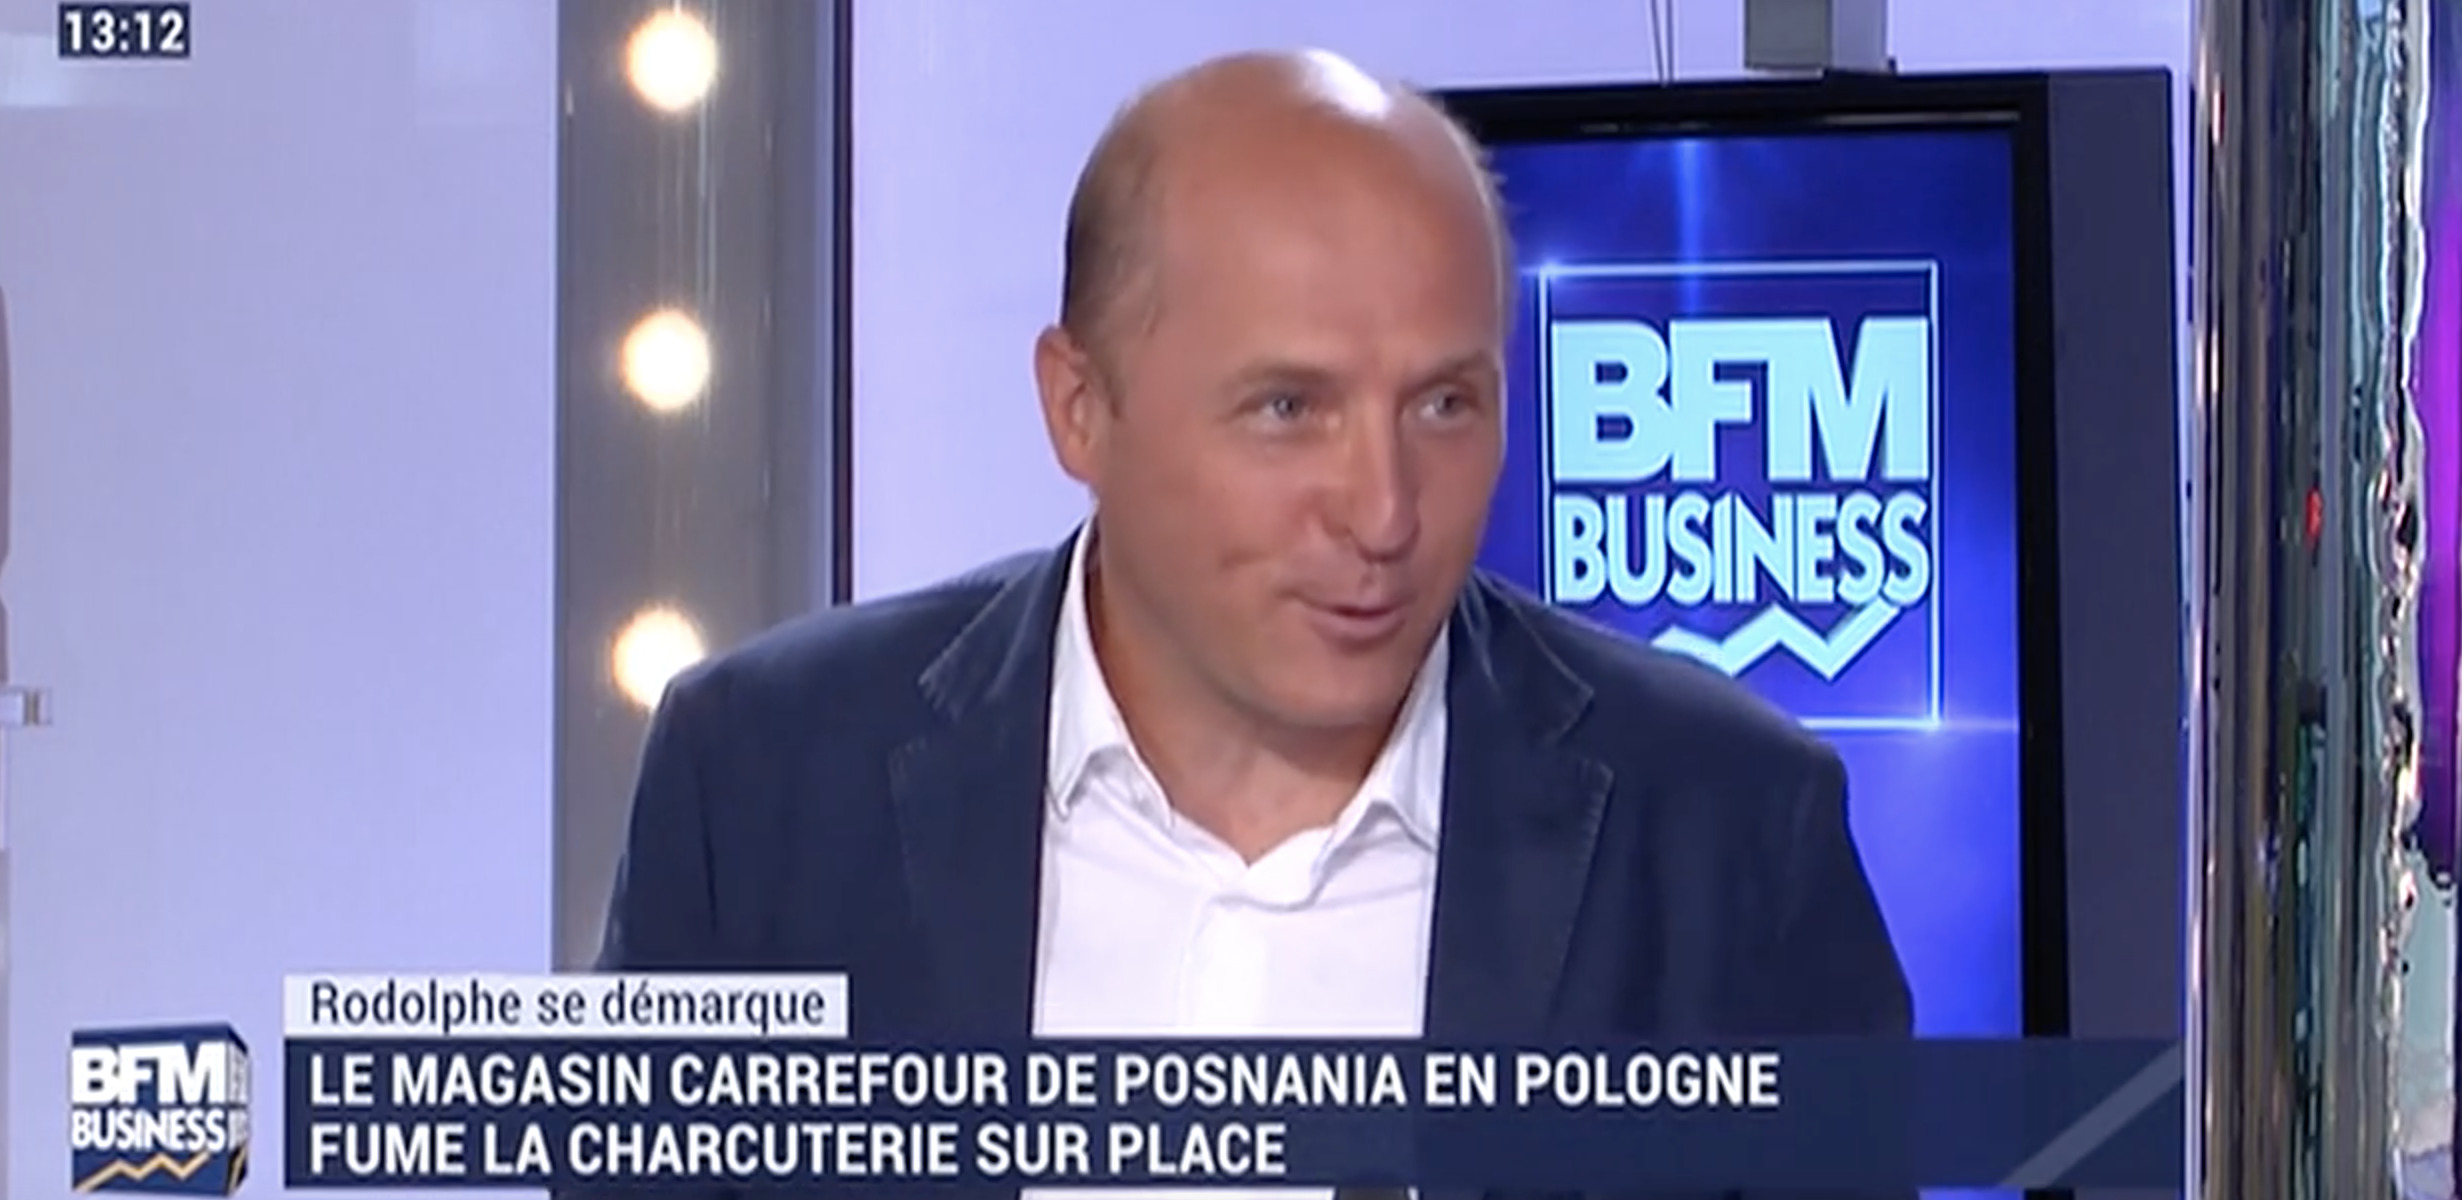 CARREFOUR POSNANIA / INNOVER POUR LE COMMERCE